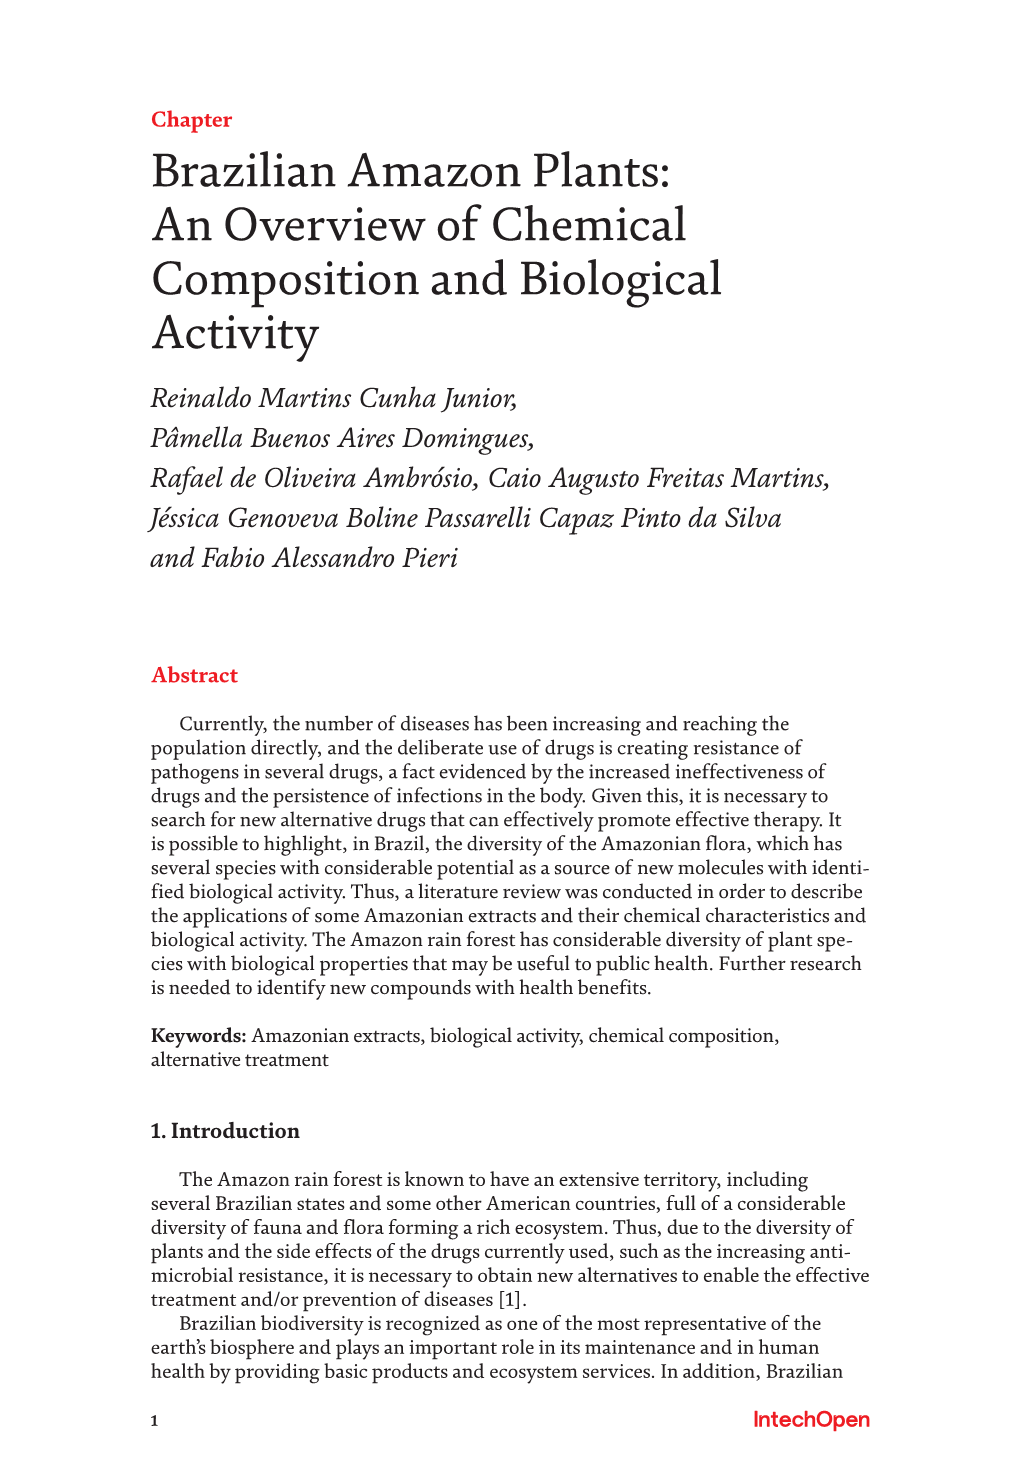 An Overview of Chemical Composition and Biological Activity